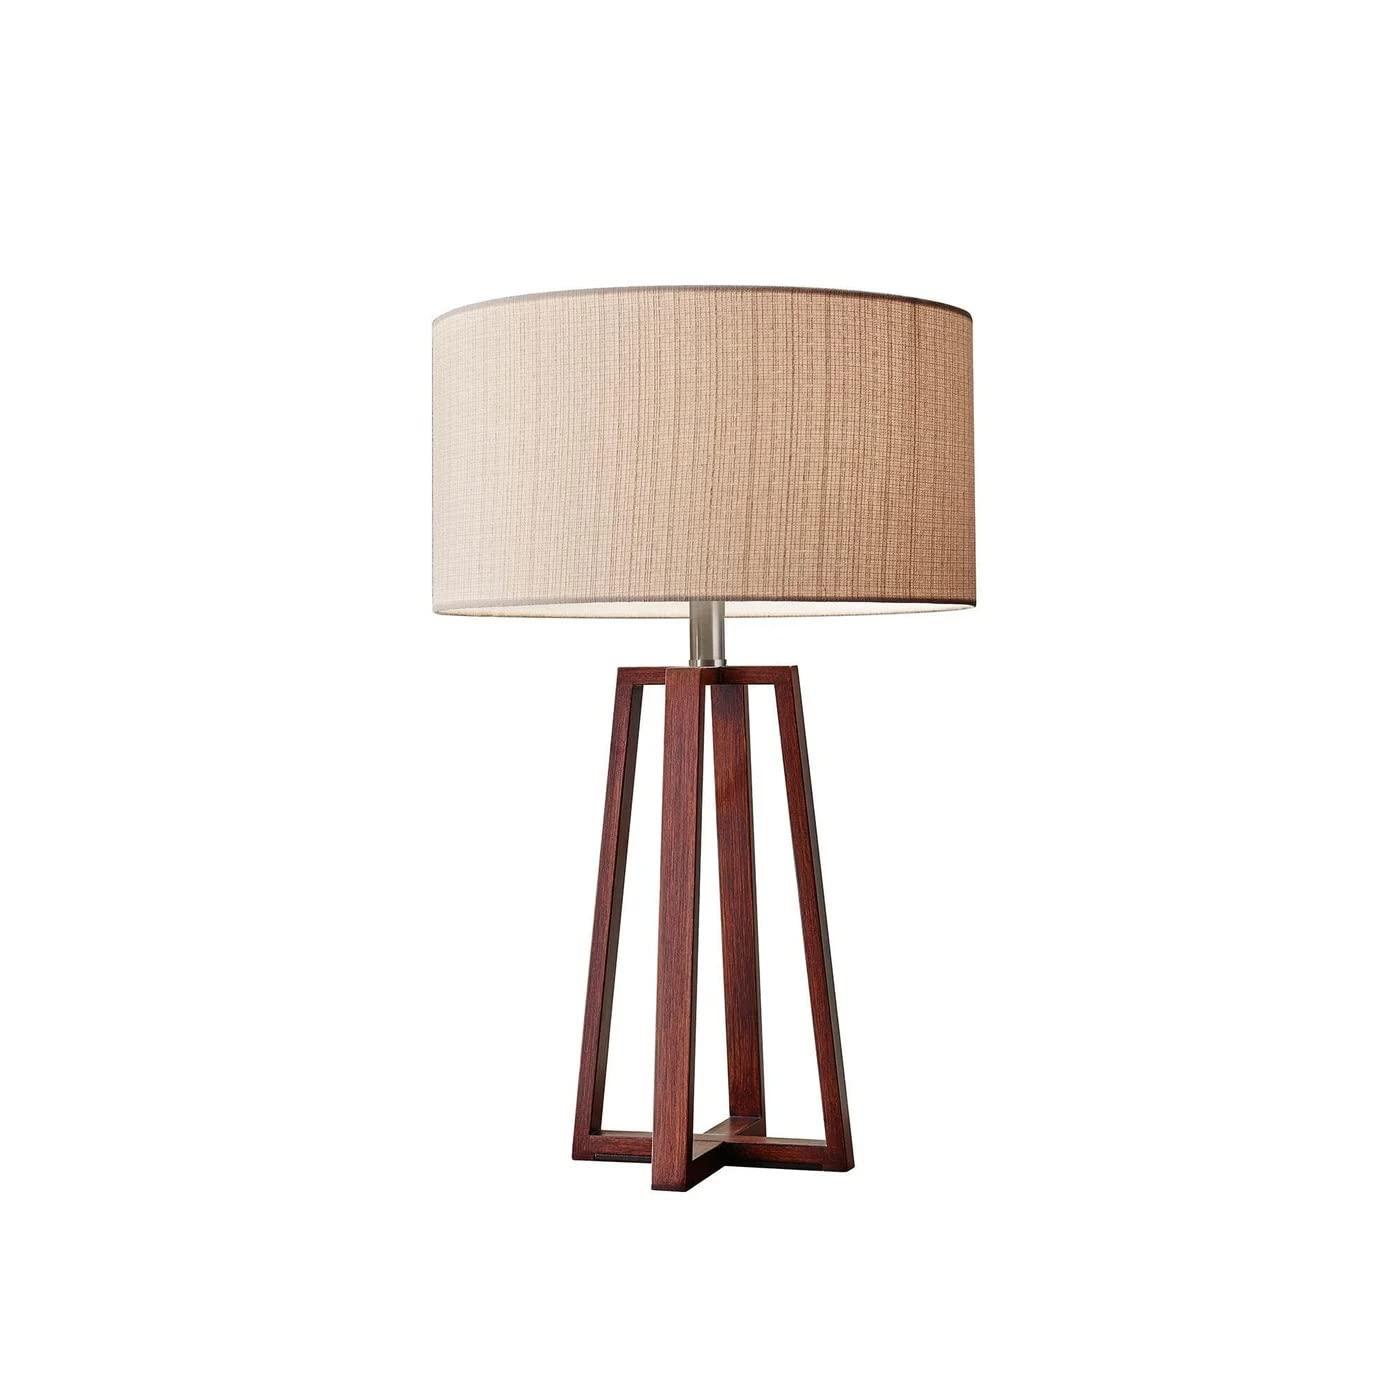 adesso 1503-15 quinn table lamp, 23.75 in, 150 w incandescent/cfl, walnut birch wood, 1 wooden lamp